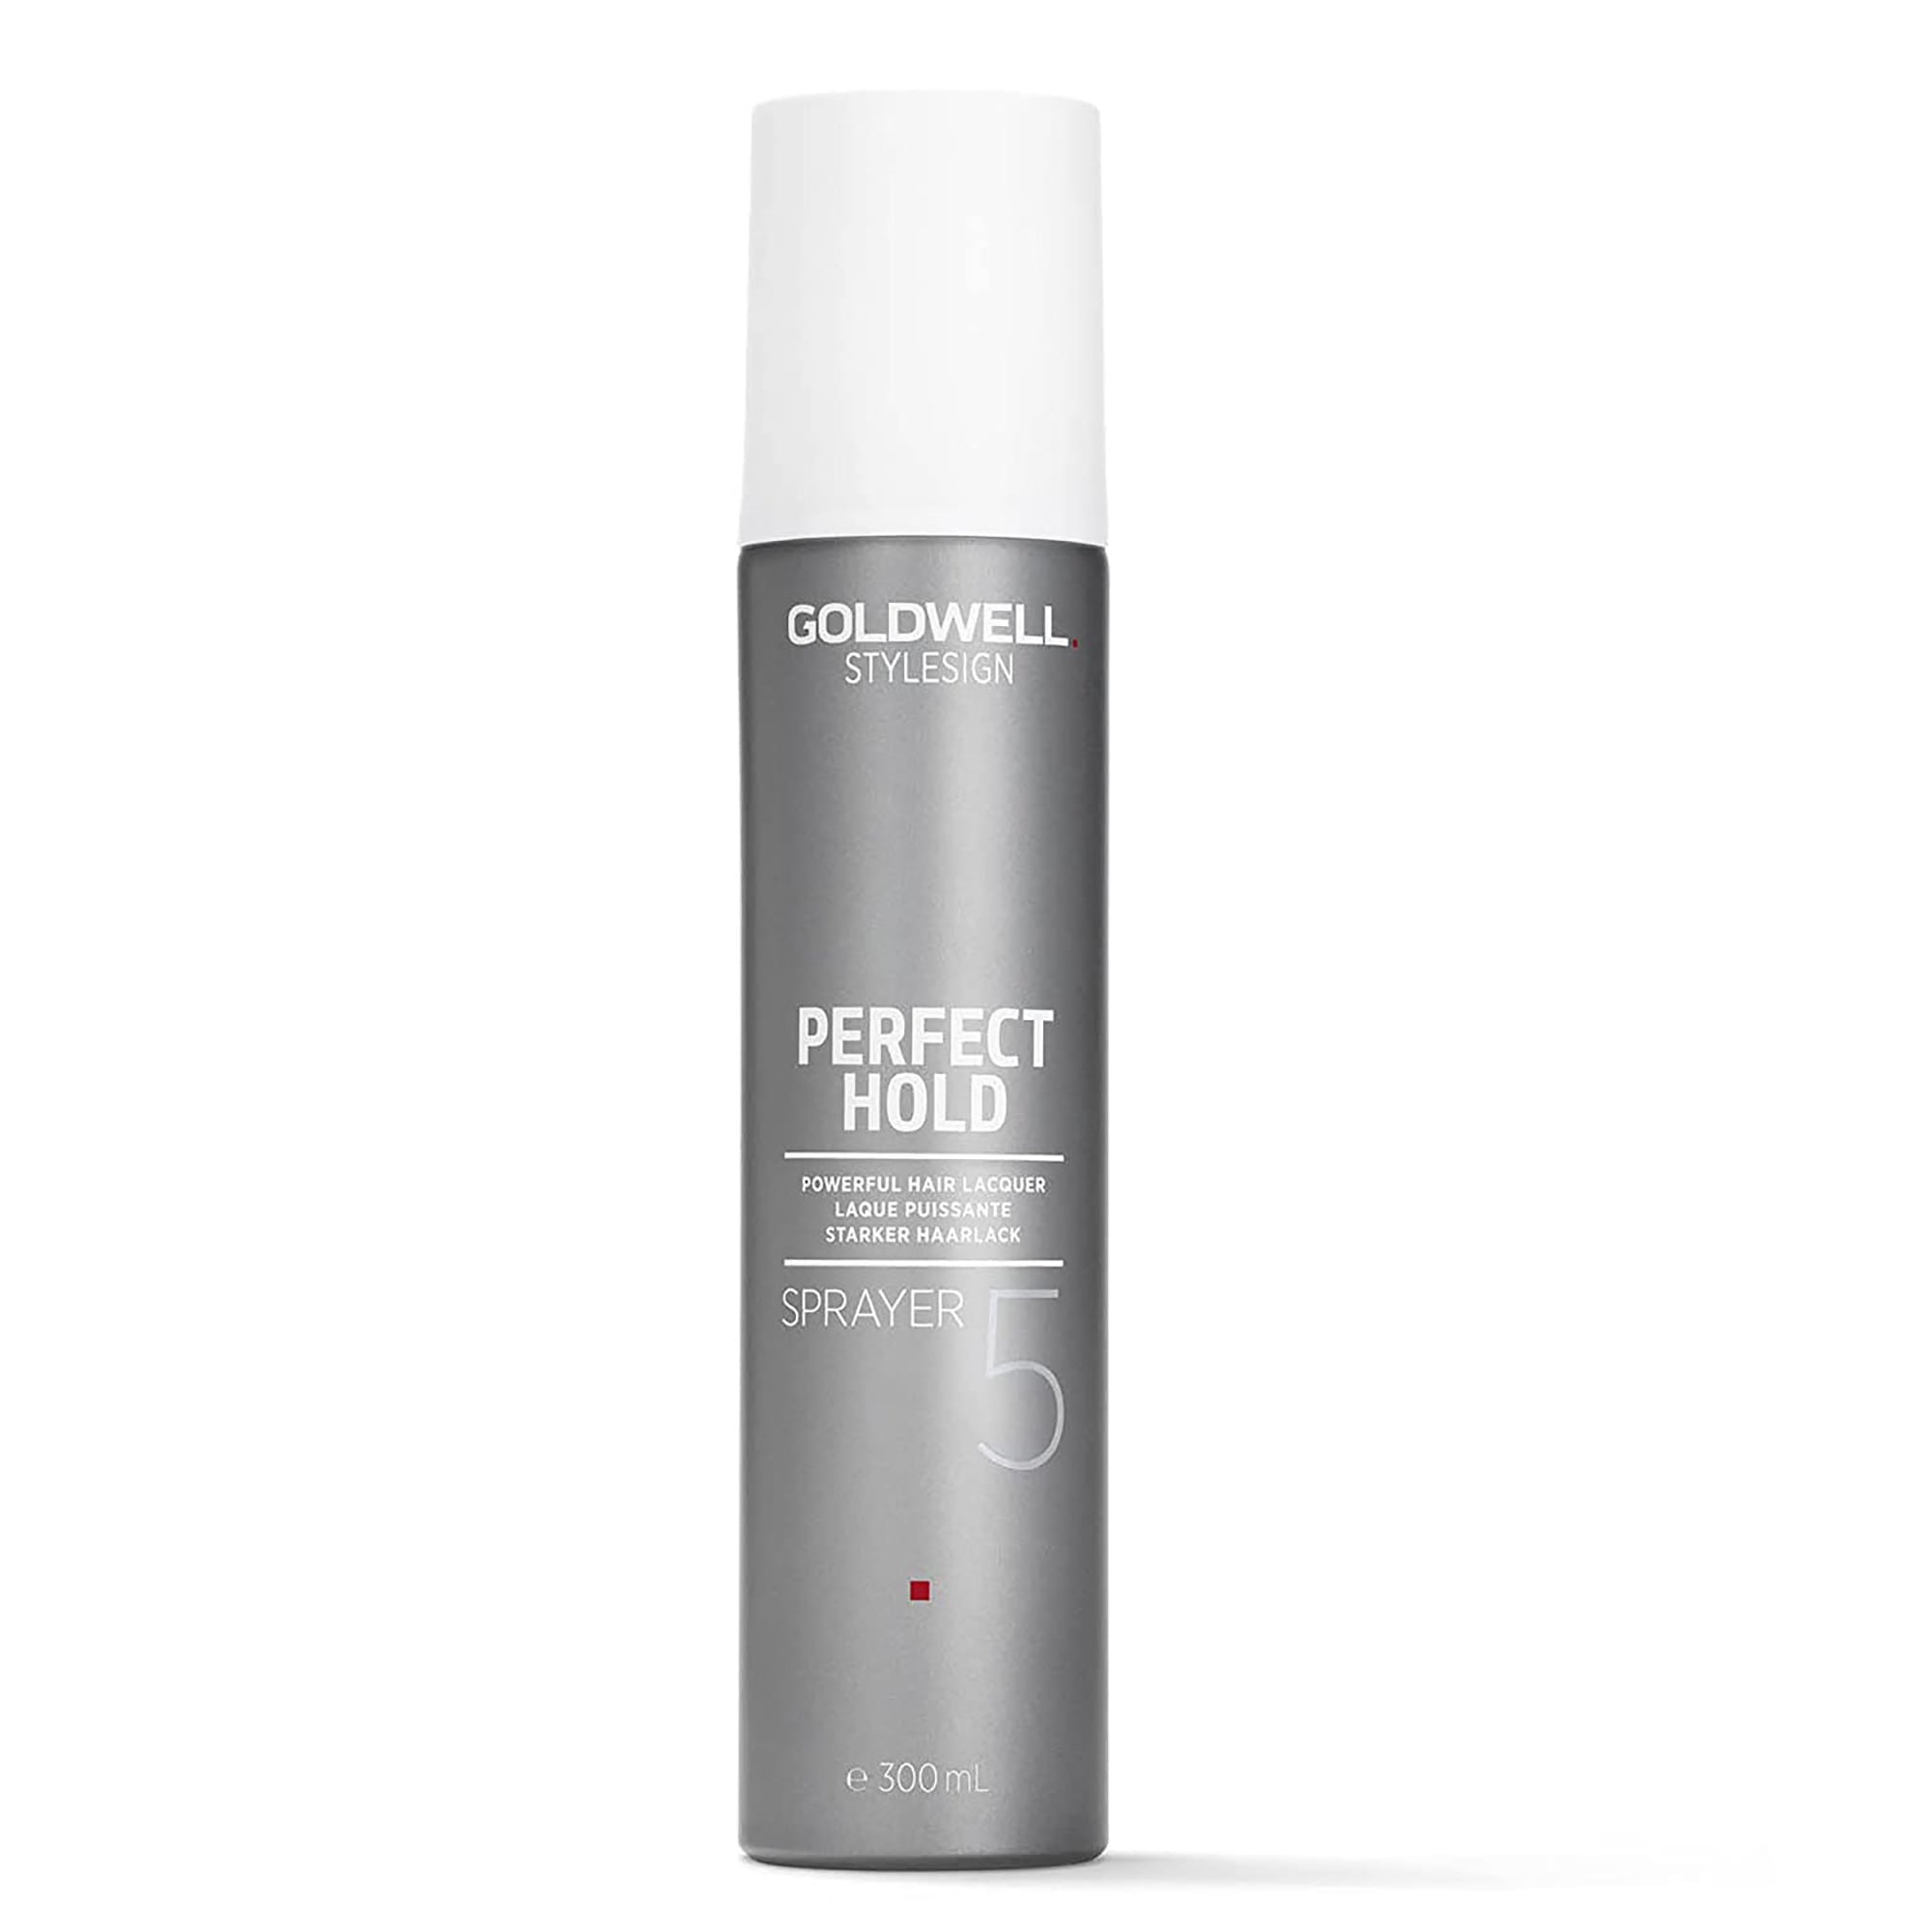 Goldwell StyleSign Perfect Hold Sprayer Powerful Hair Laquer / 10.OZ